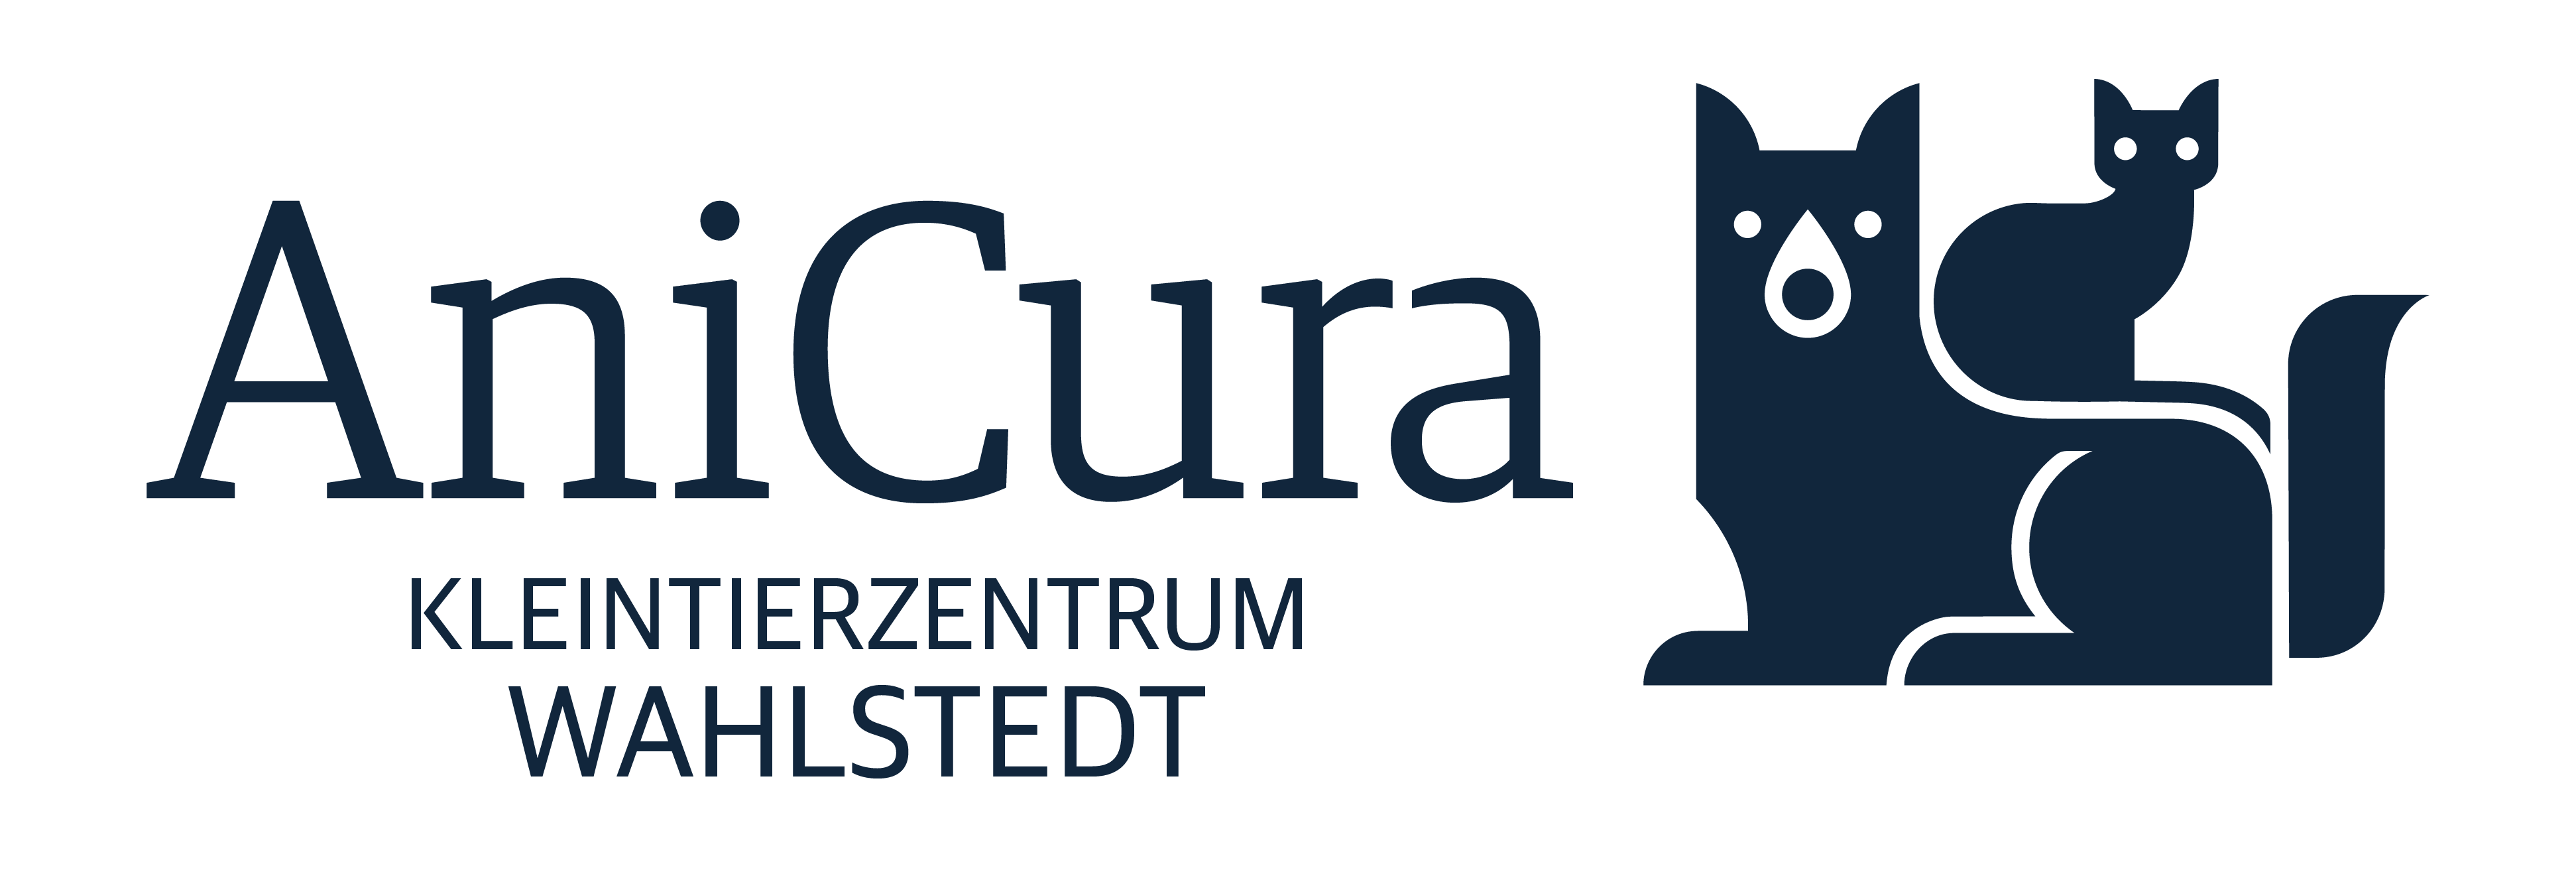 AniCura Wahlstedt logo